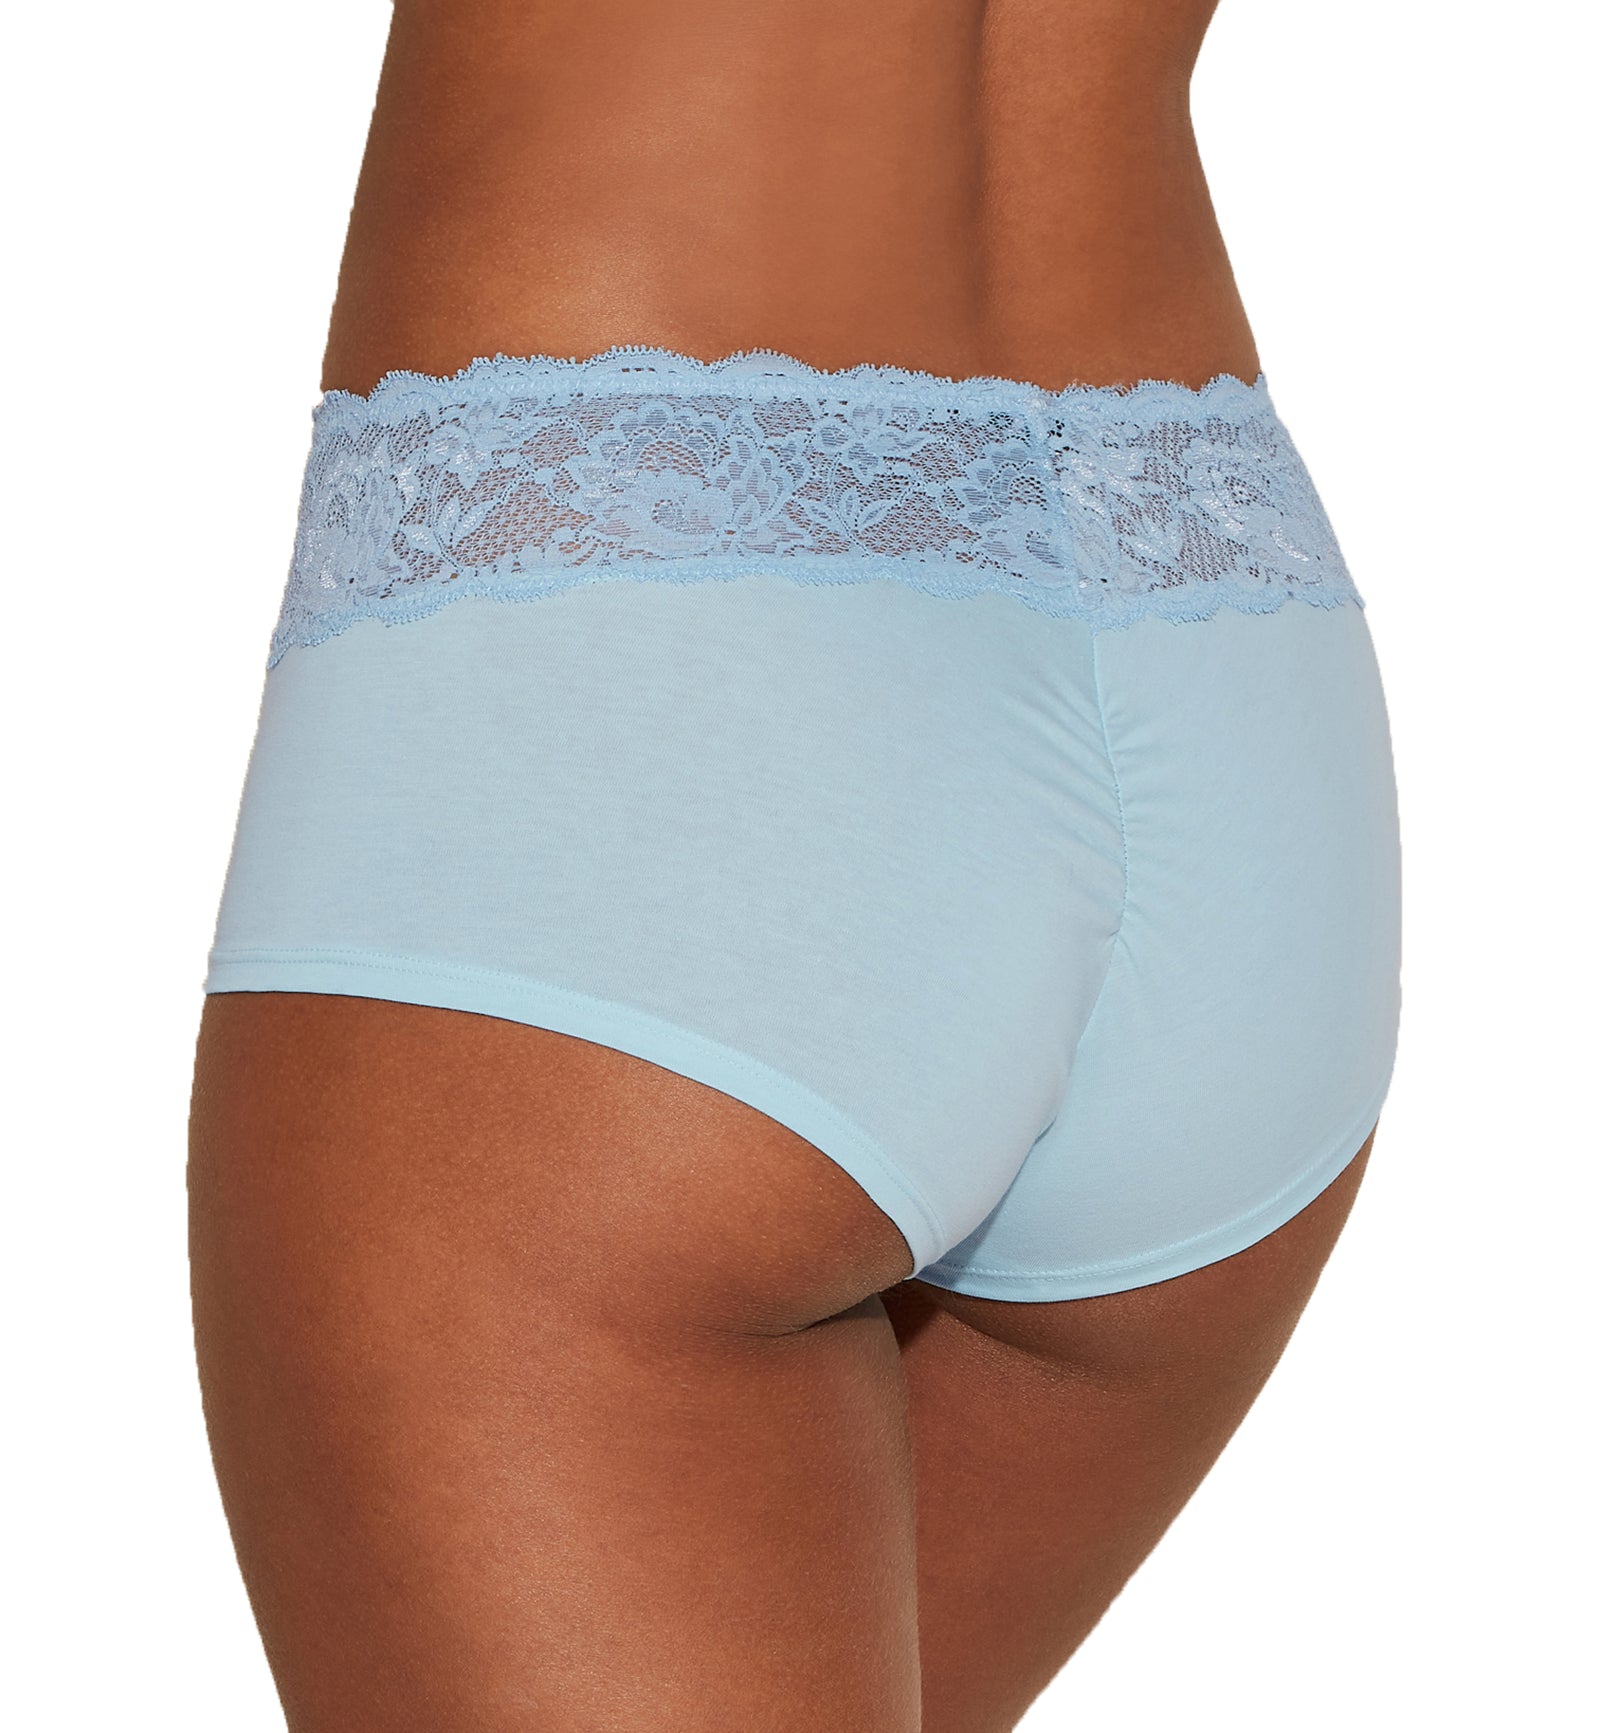 Cosabella Never Say Never Peachie Hotpant (NEVER0743),S/M,Aasmani Blue - Aasmani Blue,S/M